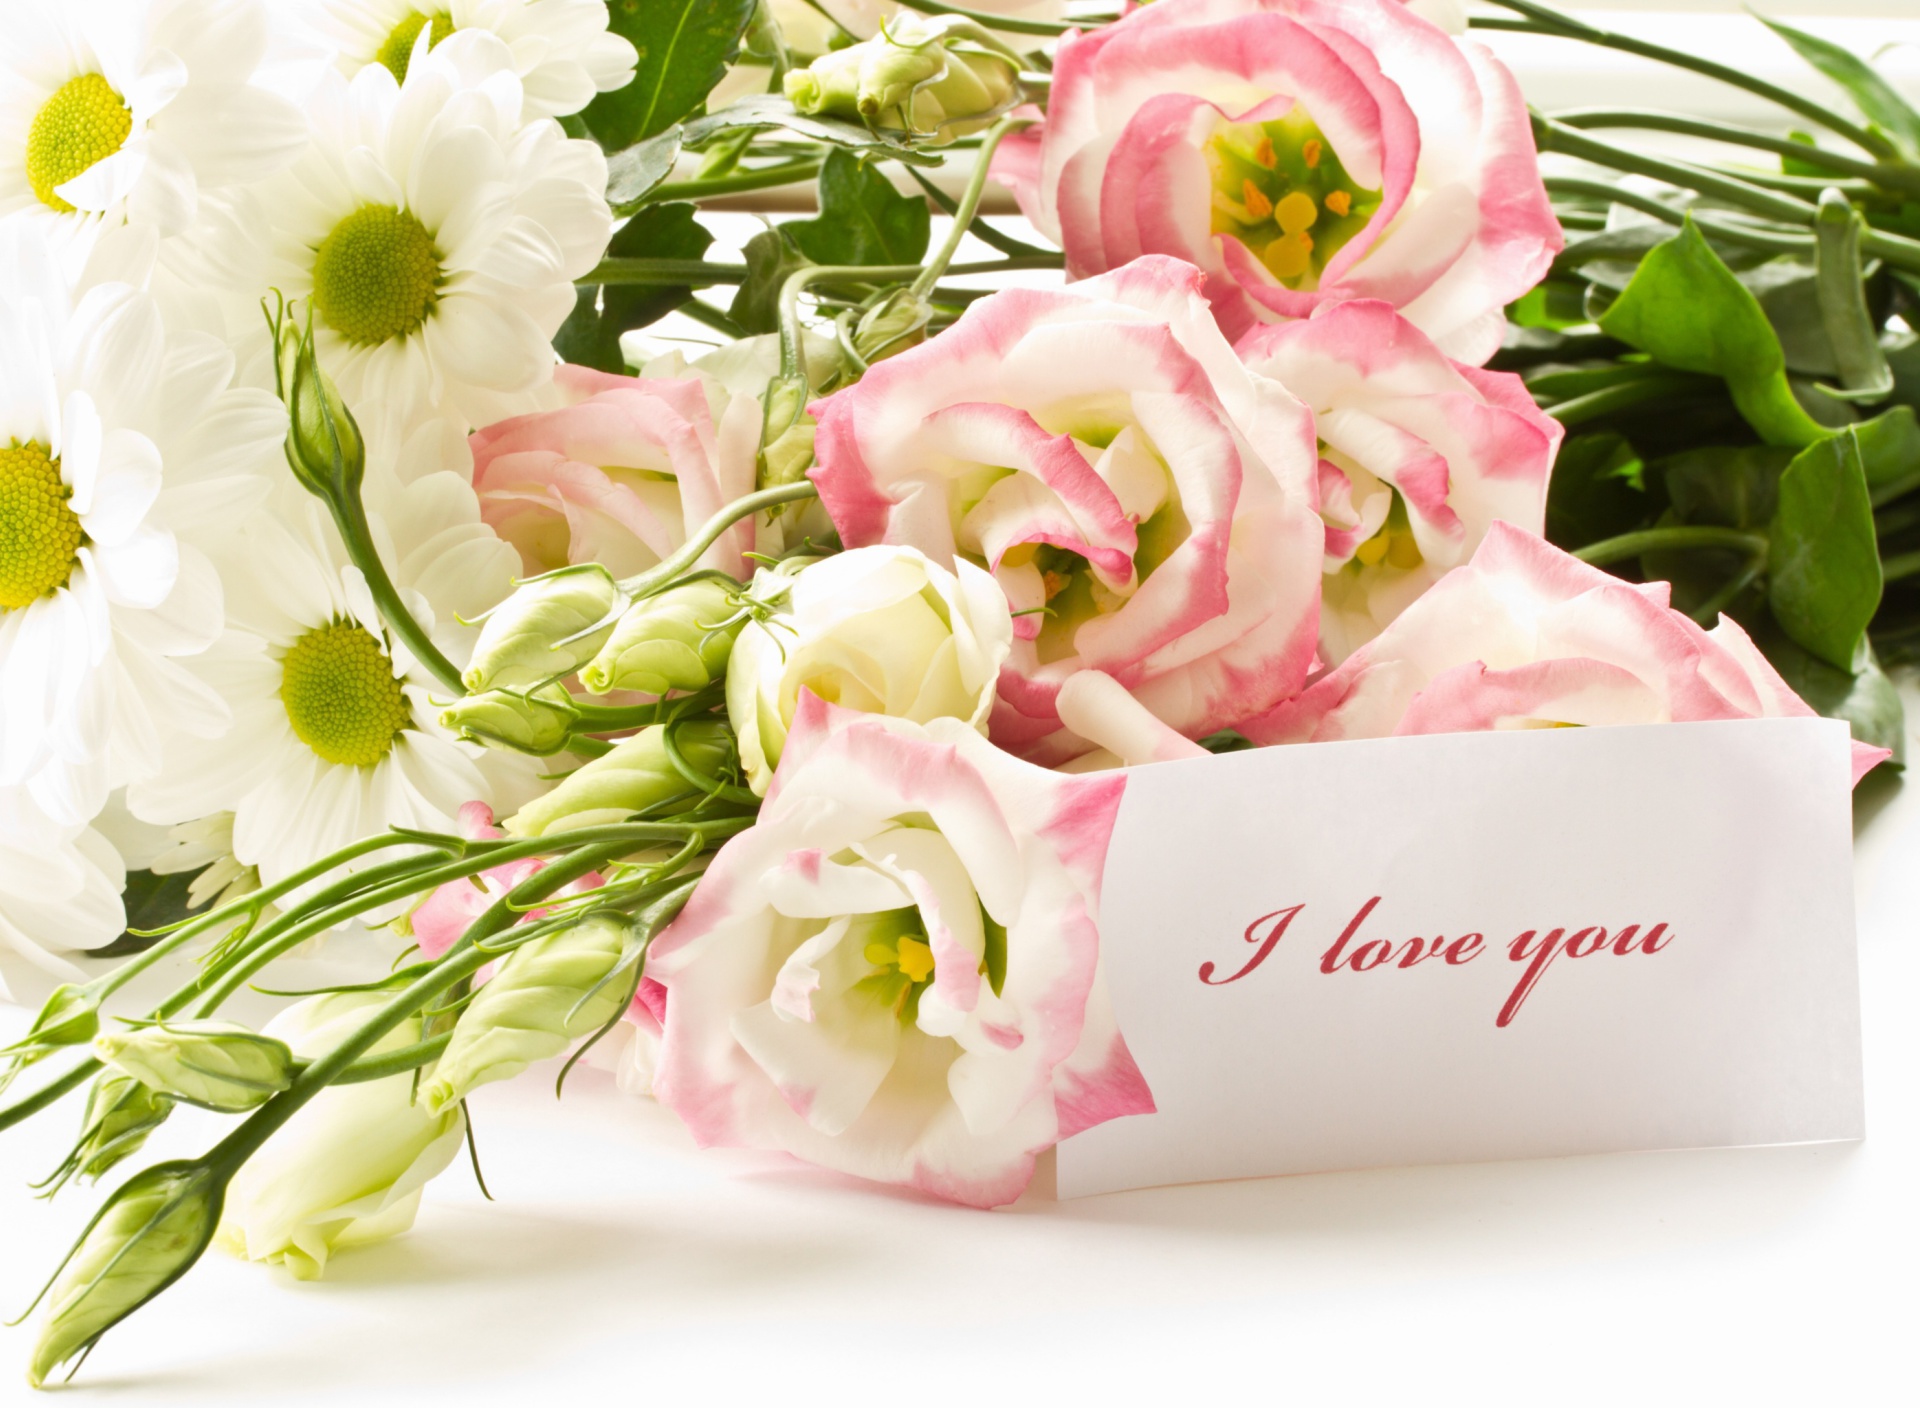 Bouquet of daisies and roses wallpaper 1920x1408